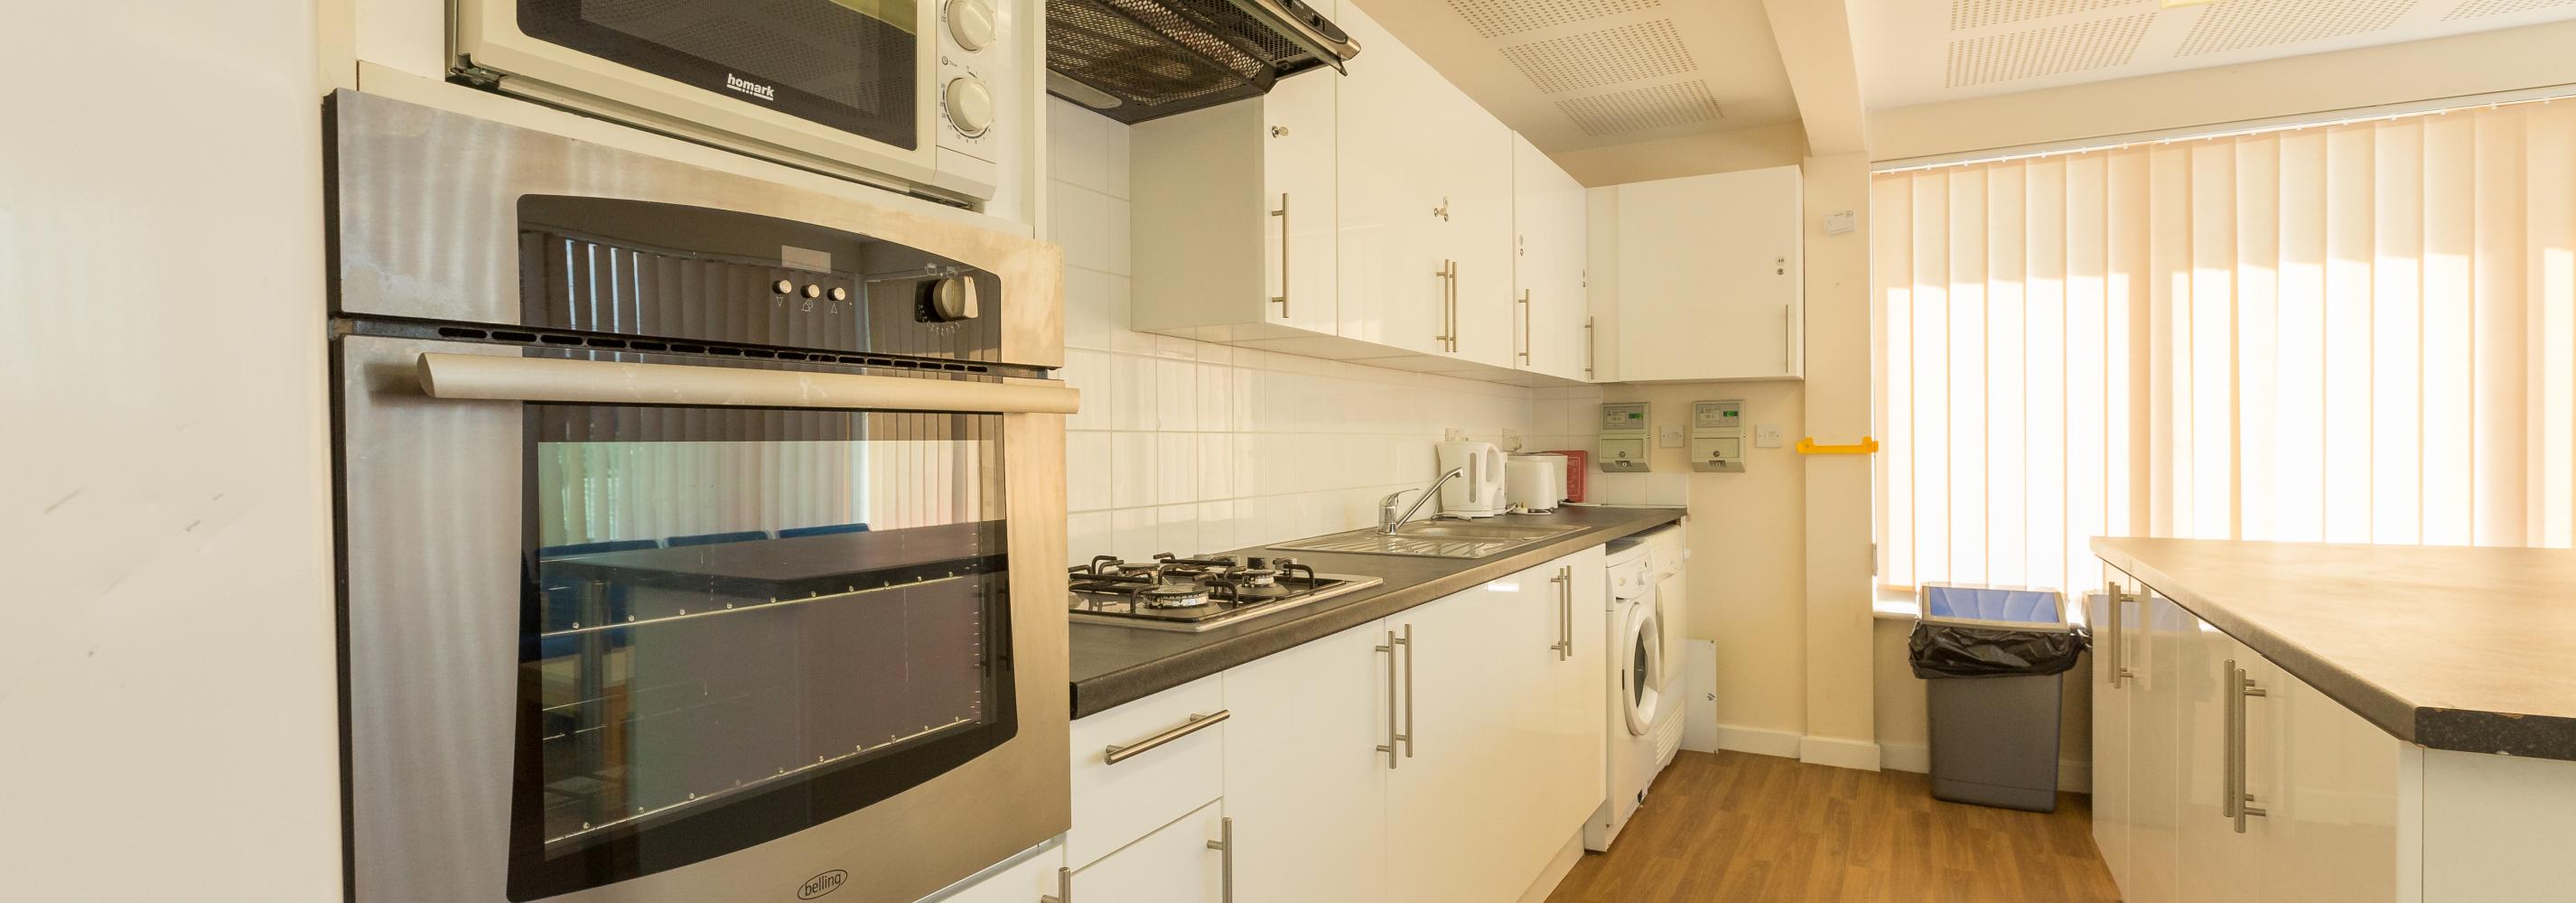 Top floor kitchen, oven, microwave, gas cooker, extractor fan, washing machine, bin, kettle, toaster, windows and blinds